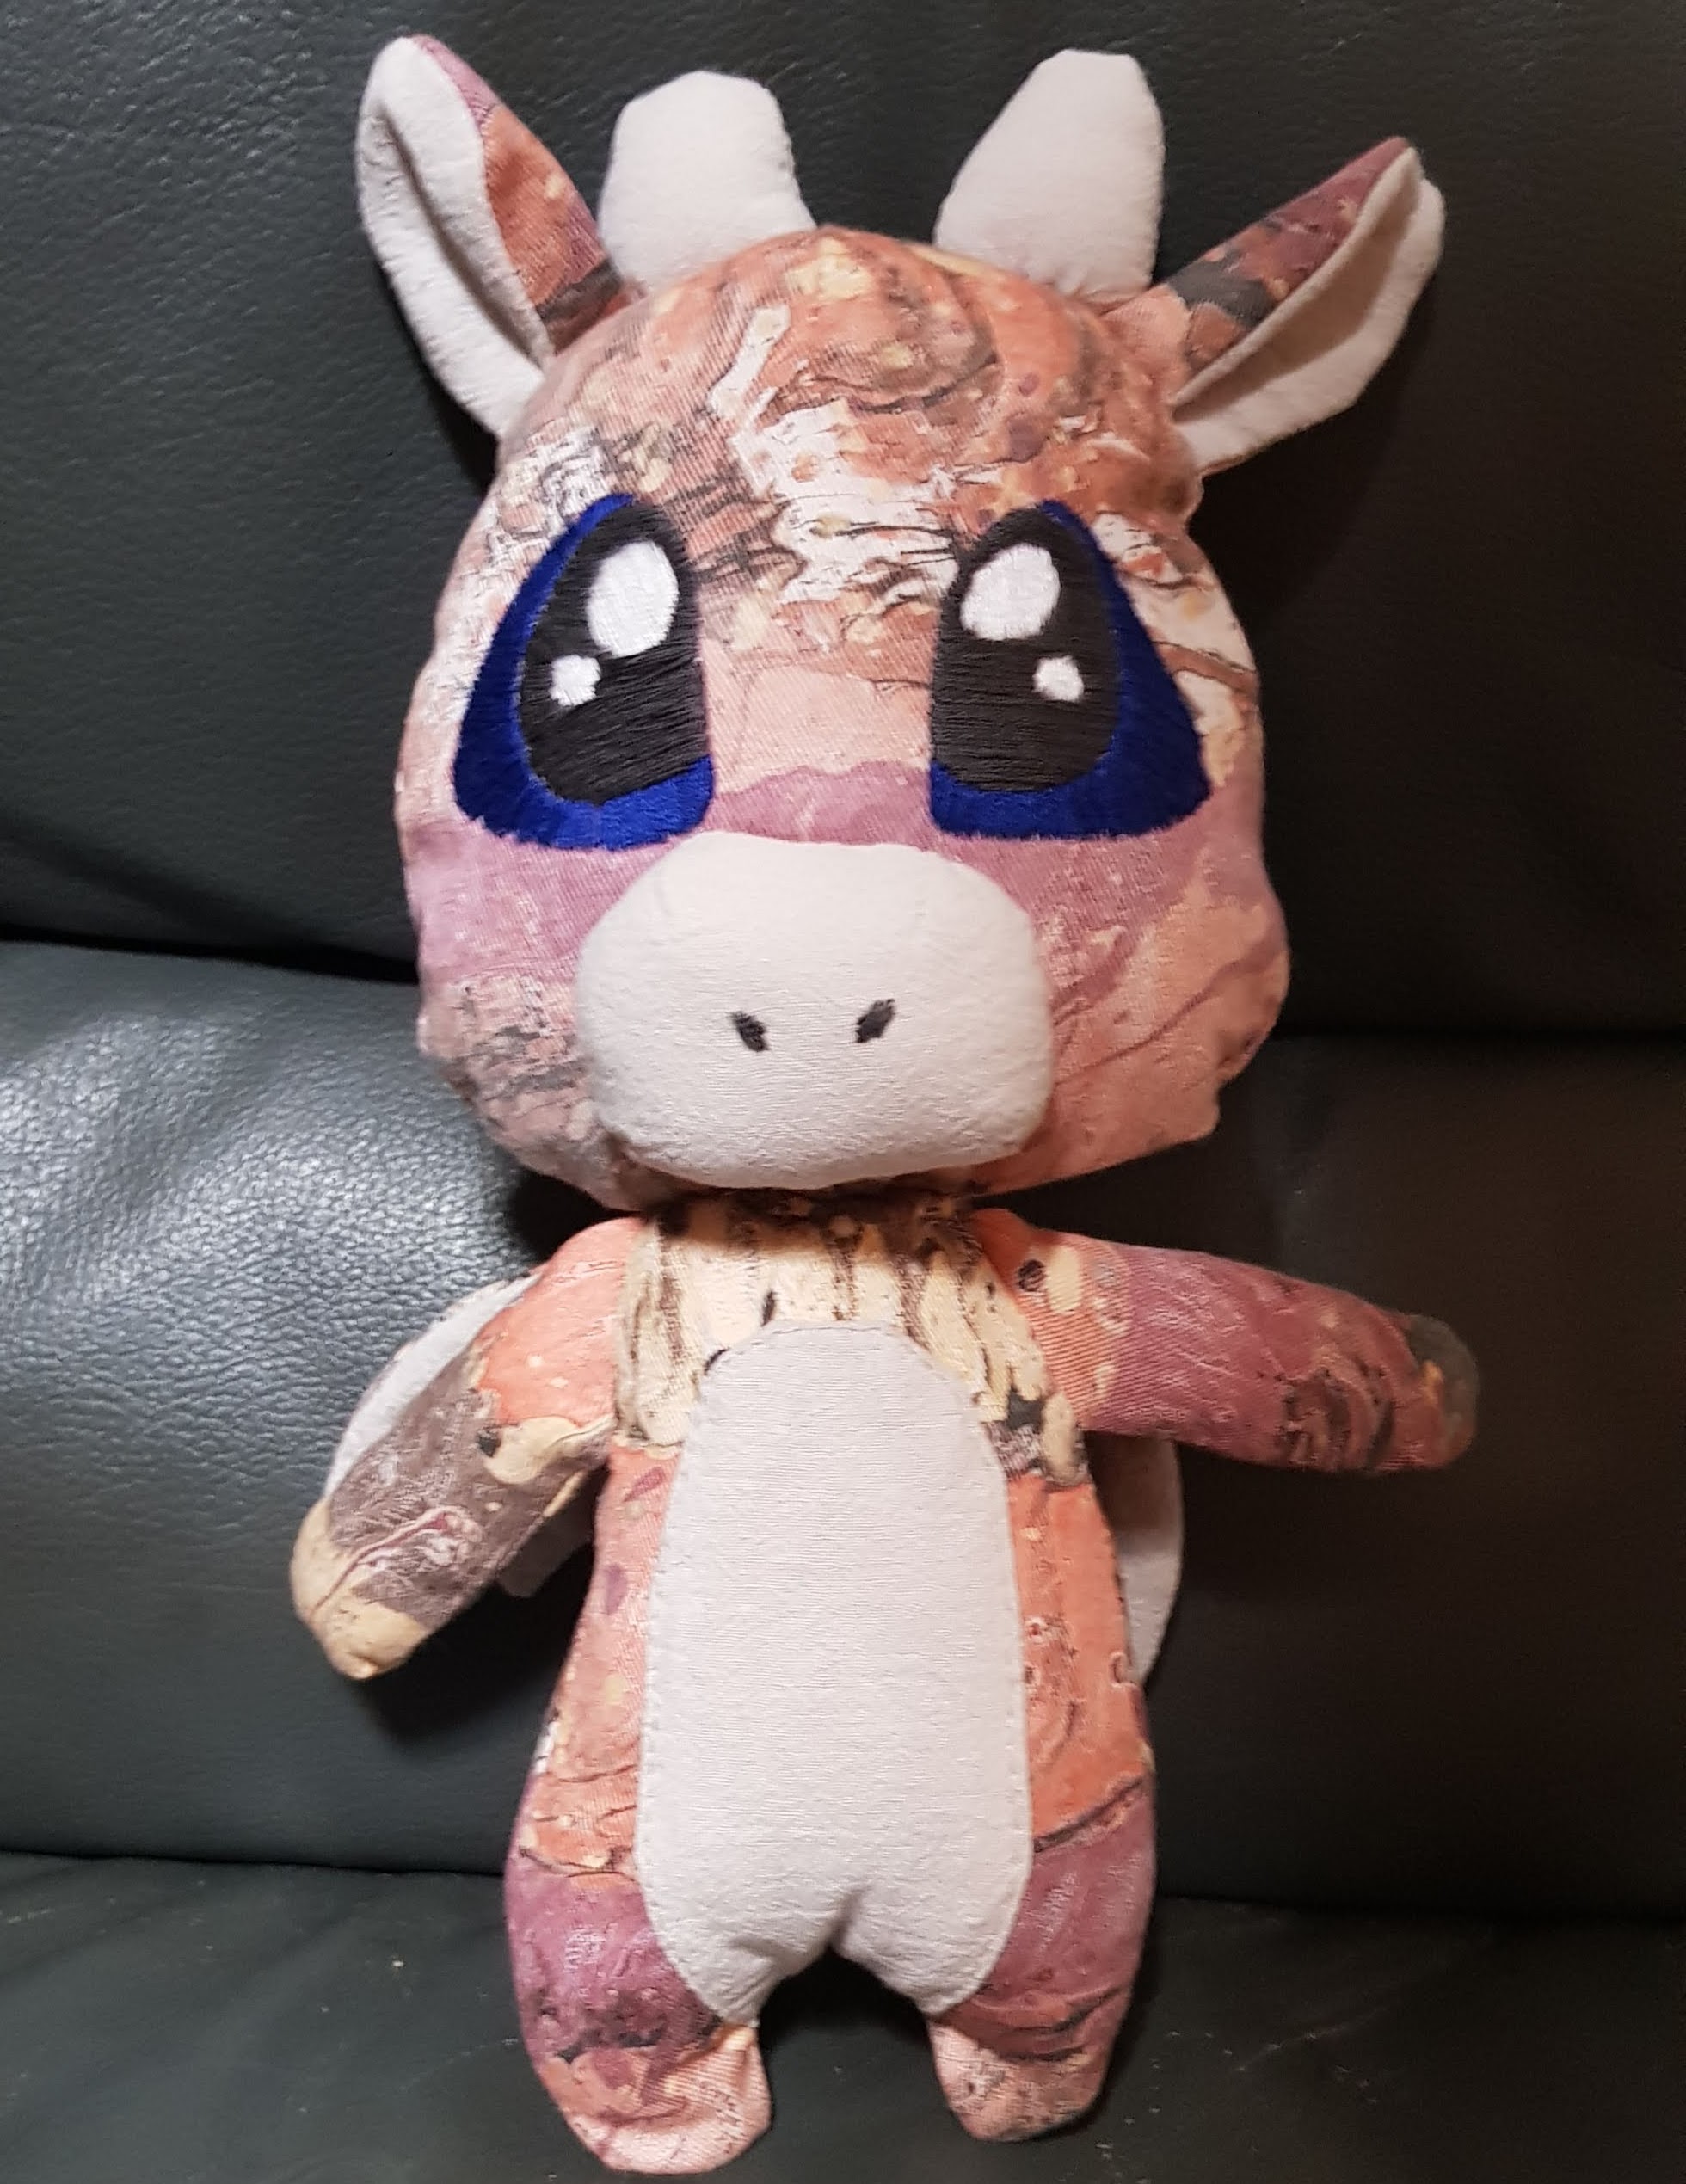 A plush dragon. The main body is made of a canvas like material which has a marbled pattern of oranges, browns and beige. The soft bits, like the inner ear and belly are a plain beige. The dragon has large chibi eyes with which are framed with a vibrant dark blue.